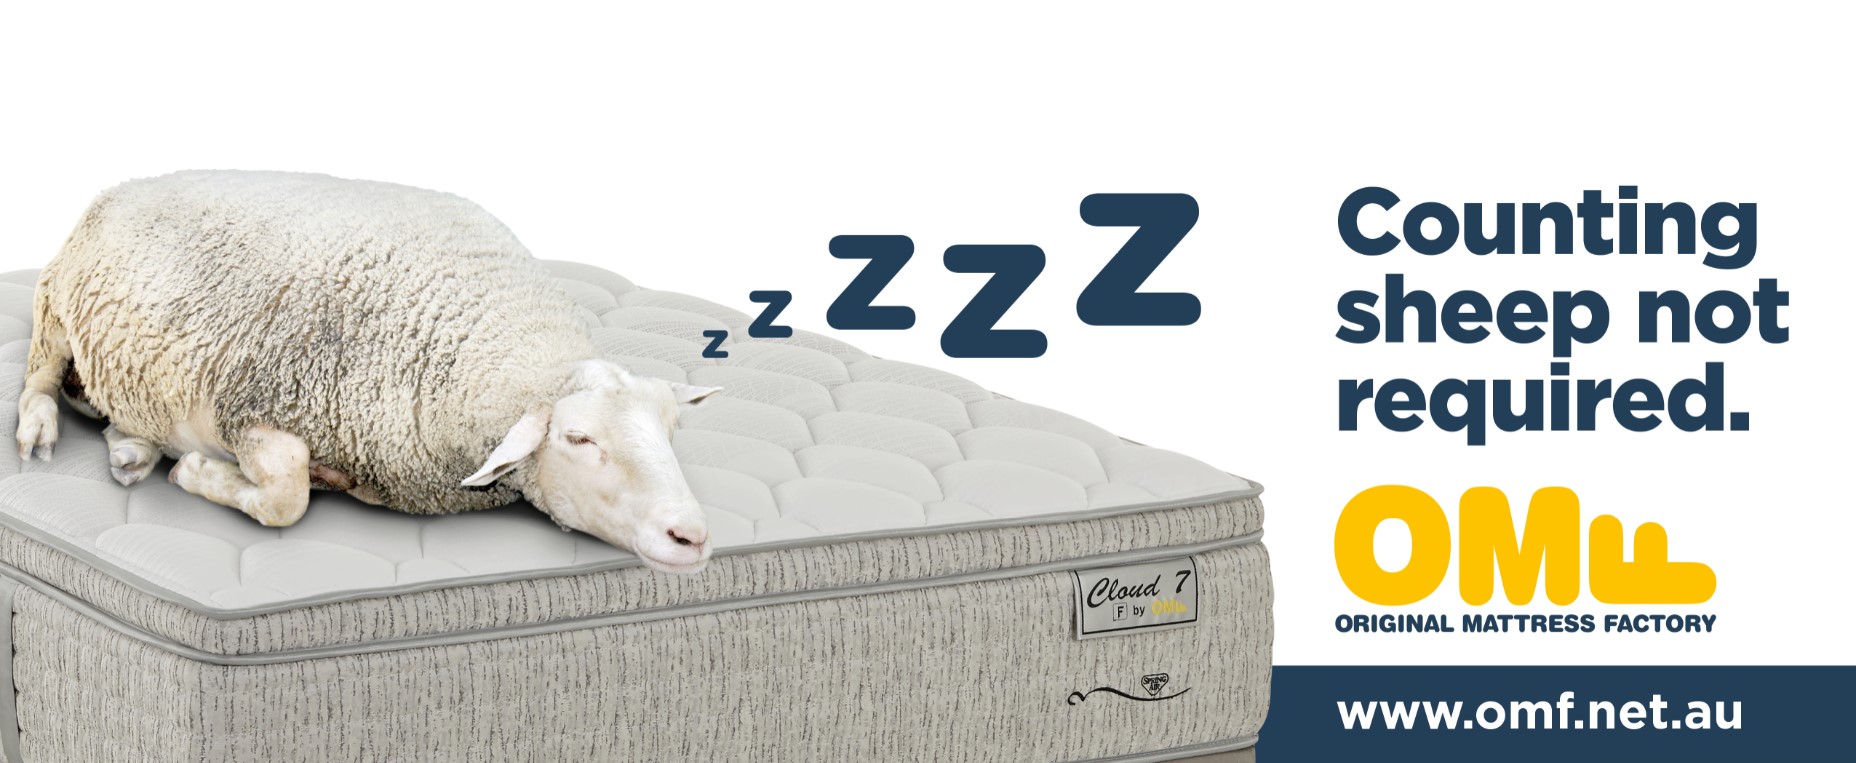 Receive a $50 COMFY CASH voucher to spend on any OMF mattress when you sign up